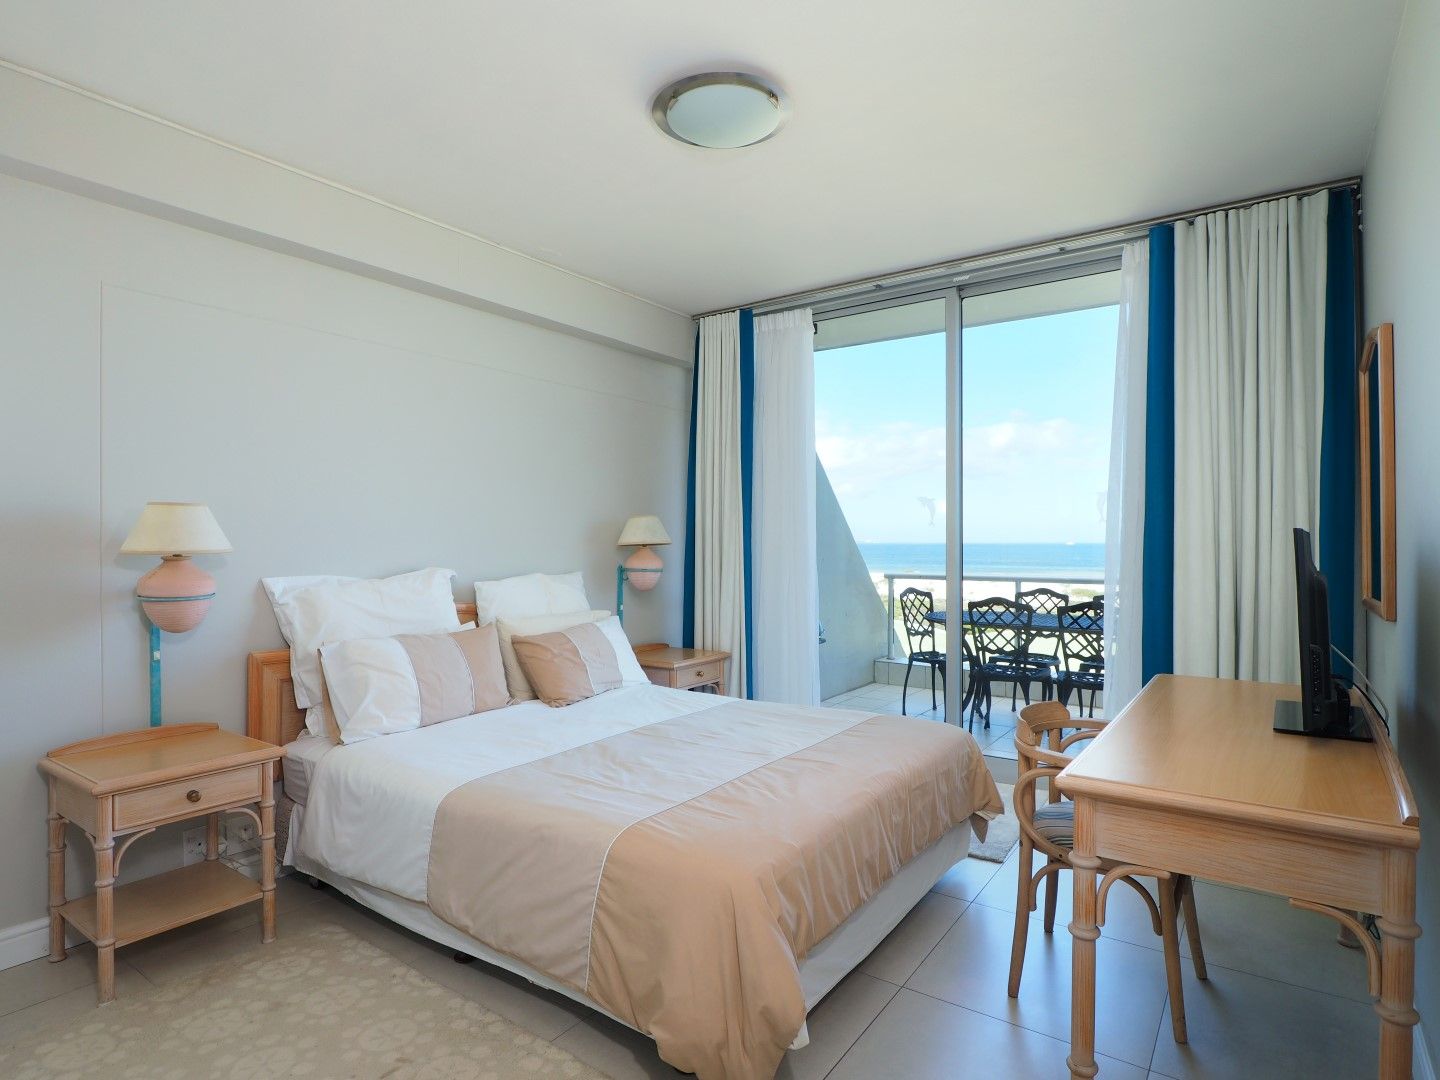 Photo 2 of Dolphin Beach Beauty accommodation in Bloubergstrand, Cape Town with 3 bedrooms and 2 bathrooms